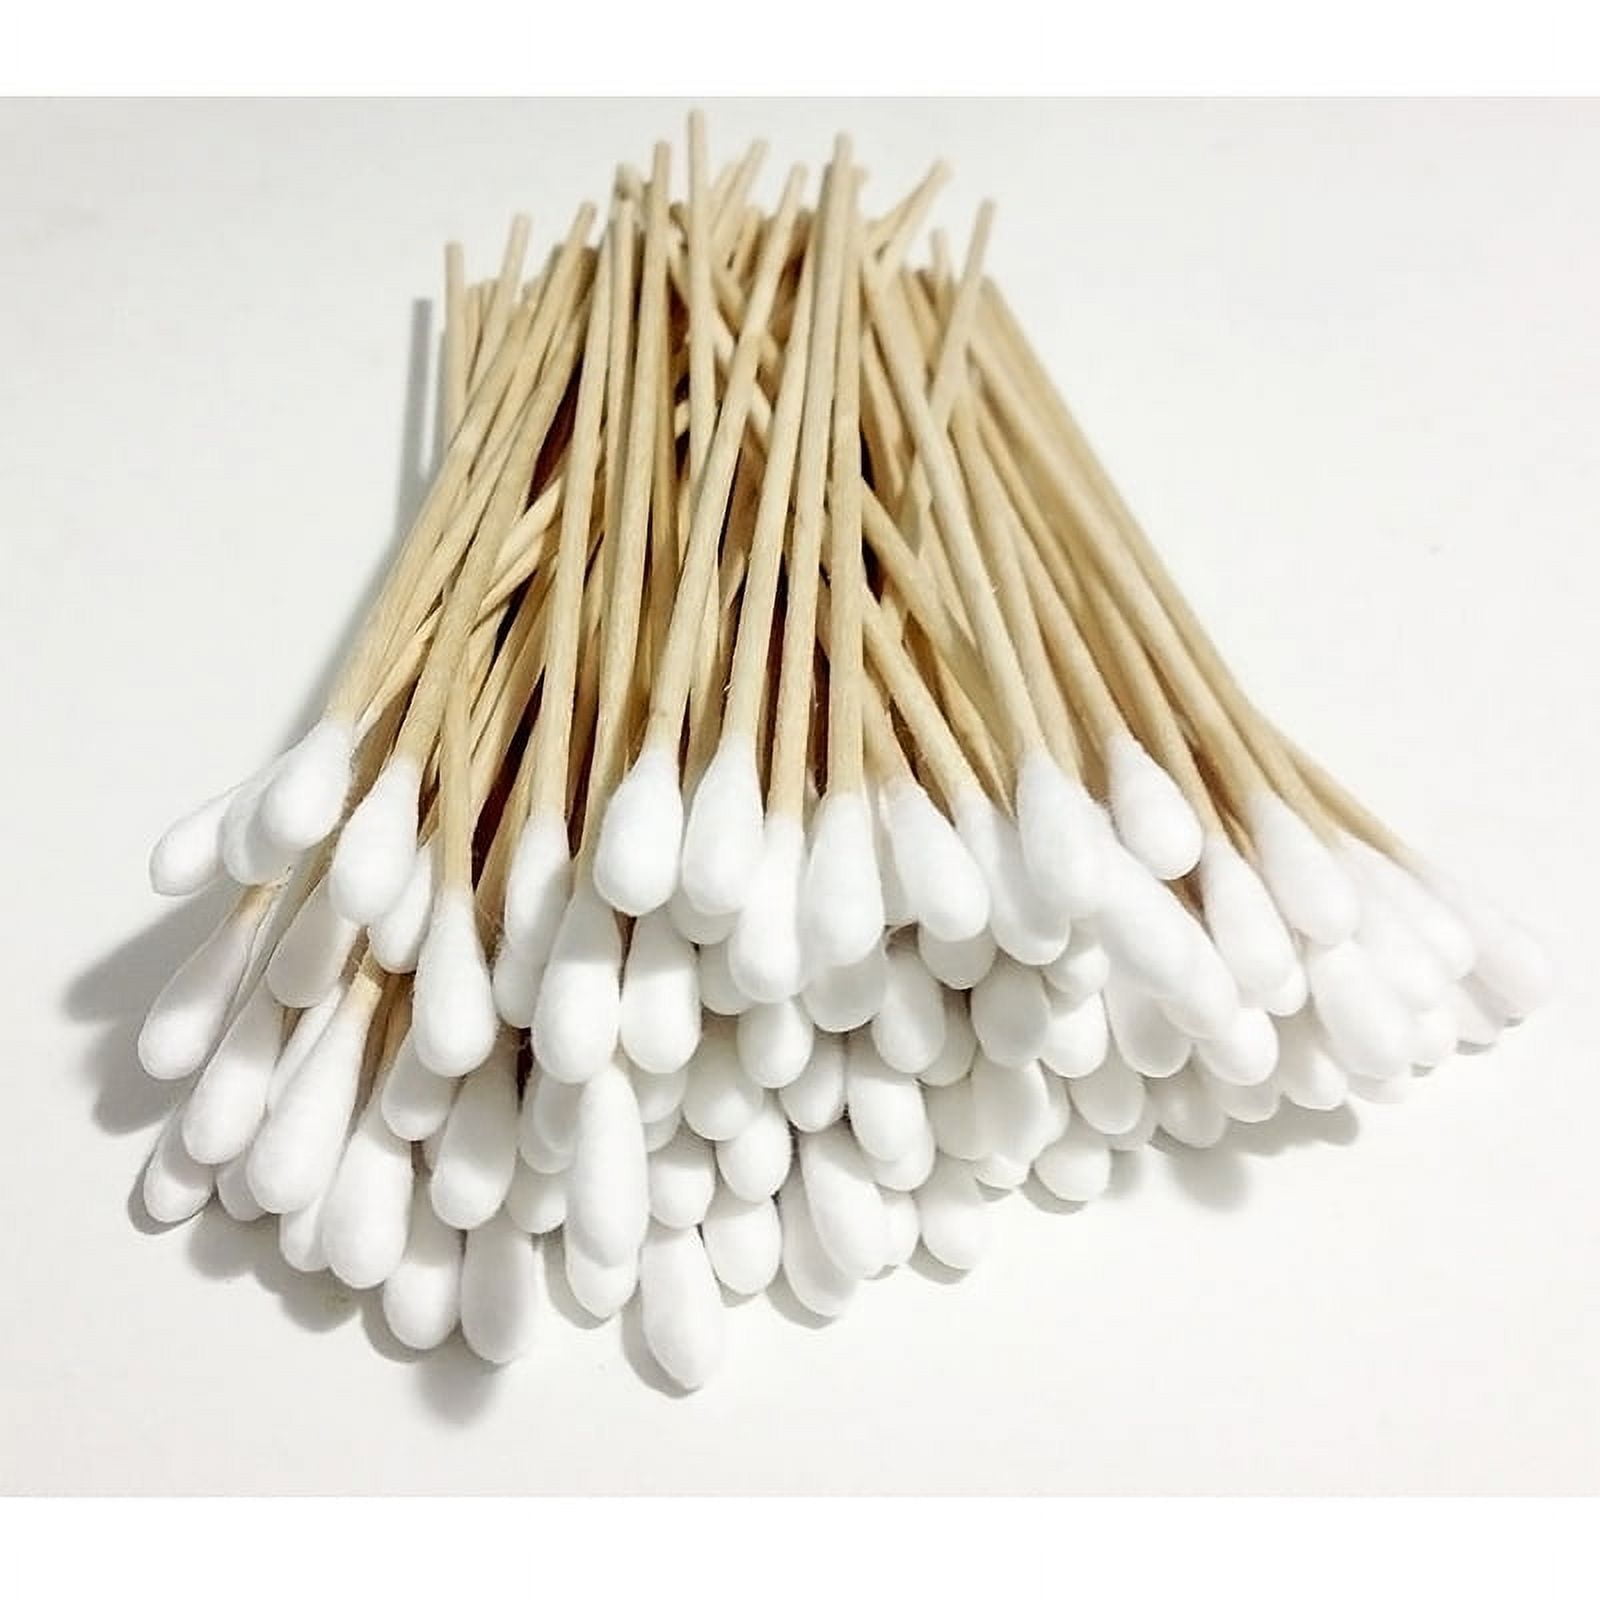 LastSwab Reusable Cotton Swabs for Ear Cleaning - The Sustainable and  Sanitary Alternative to Single-Use Q Tips - Zero Waste and Easy to Clean -  Comes with a Convenient Travel Case Holder - Black